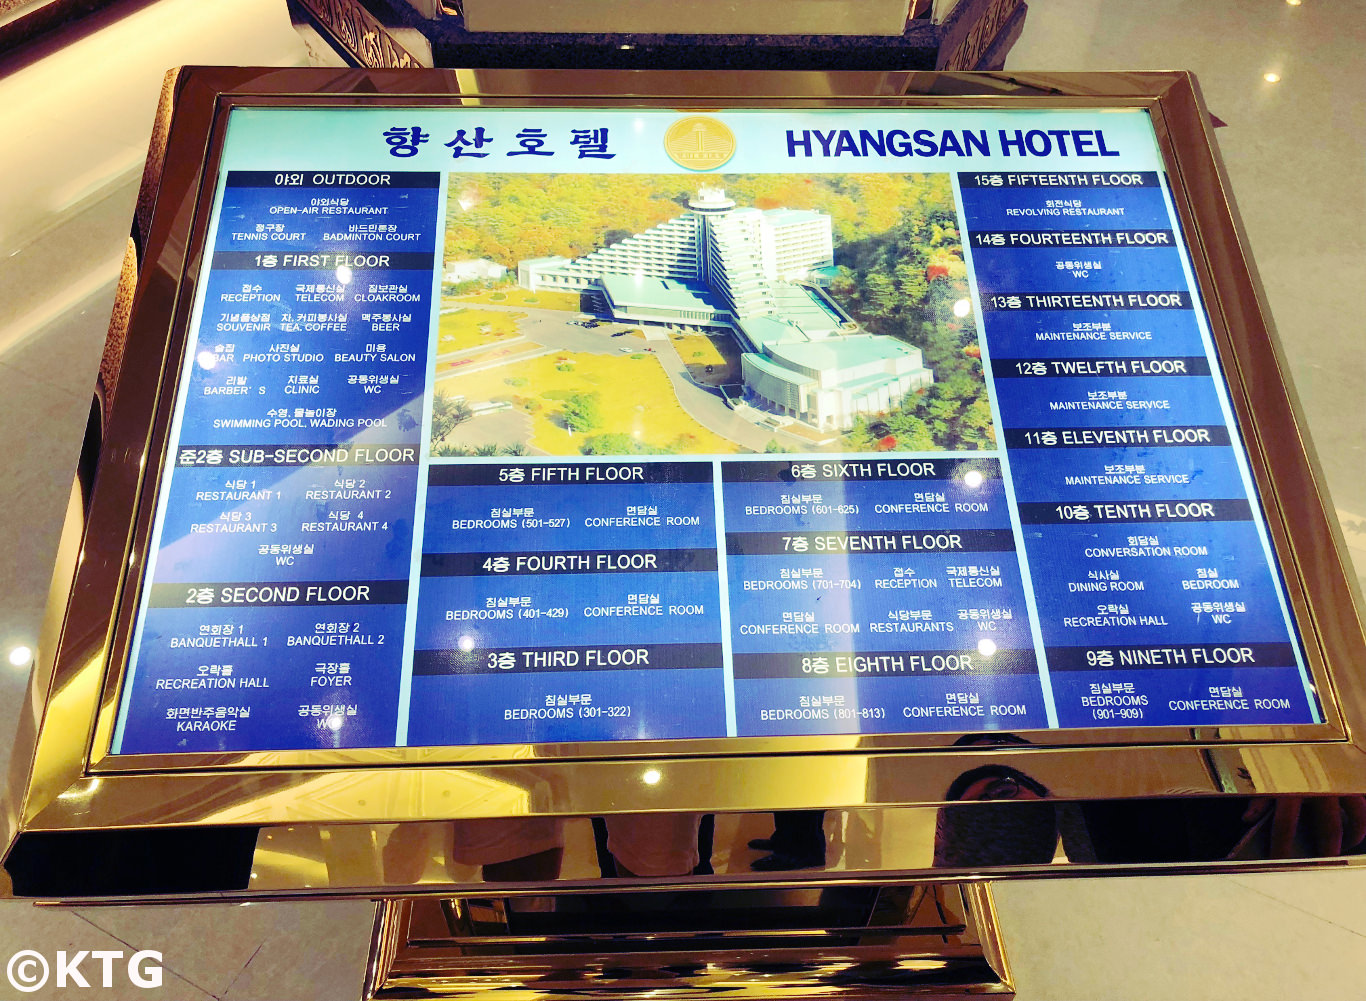 Map of the Hyangsan Hotel in Mount Myohyang, North Korea. This is the most luxurious hotel in the DPRK